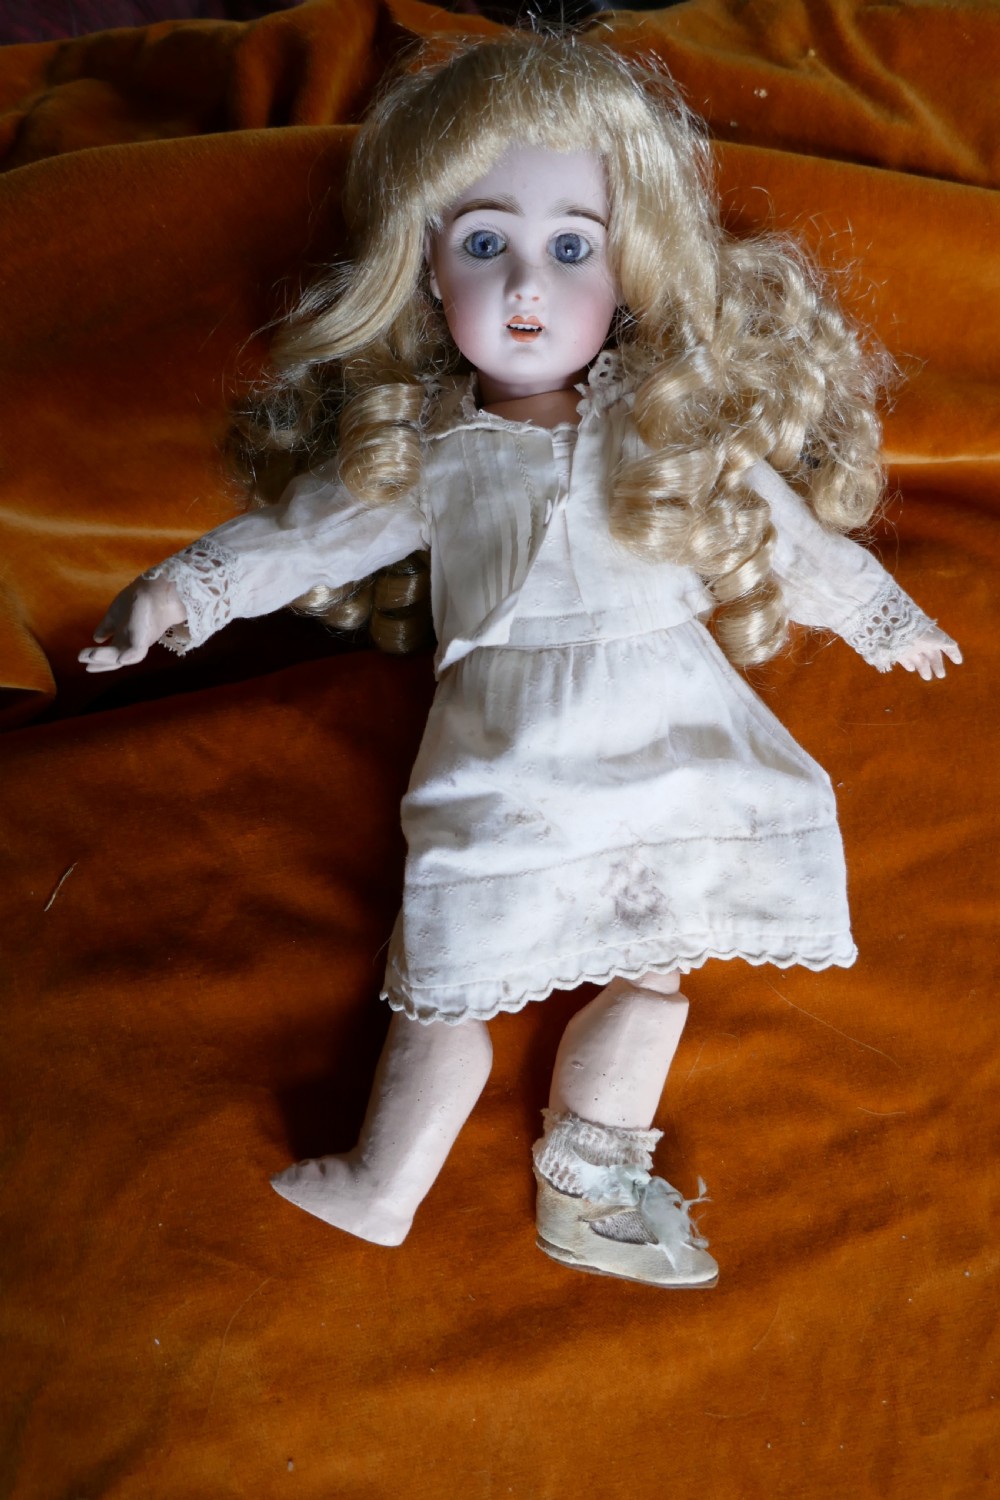 19th century character doll with wig and clothes